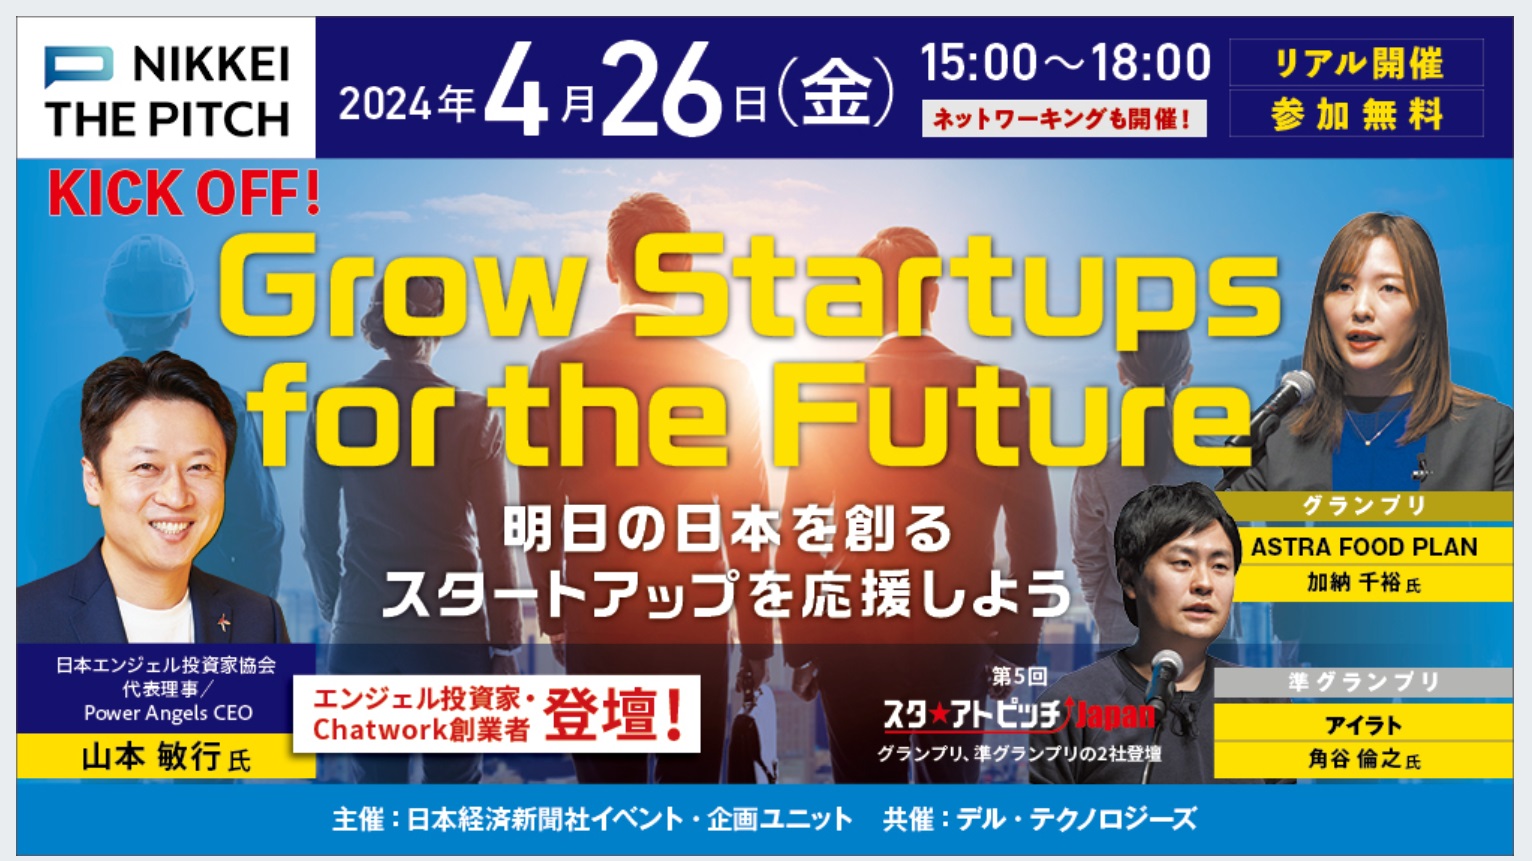 Our company will be on stage at “Grow Startups for the Future – Let’s support the startups that will create tomorrow’s Japan” sponsored by Nikkei Shimbun.